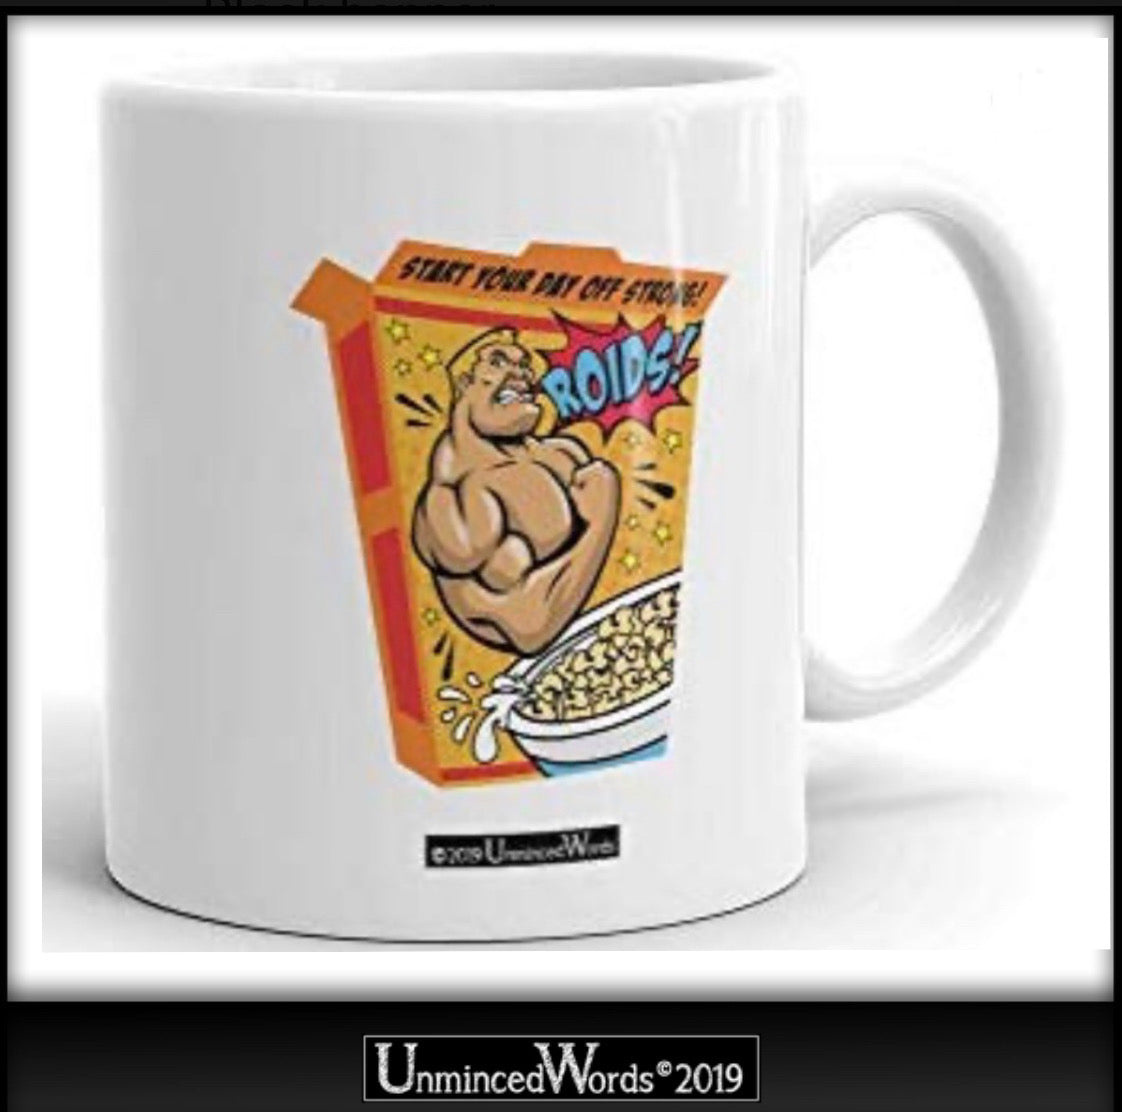 Start your day strong w coffee in this ROIDS CEREAL mug